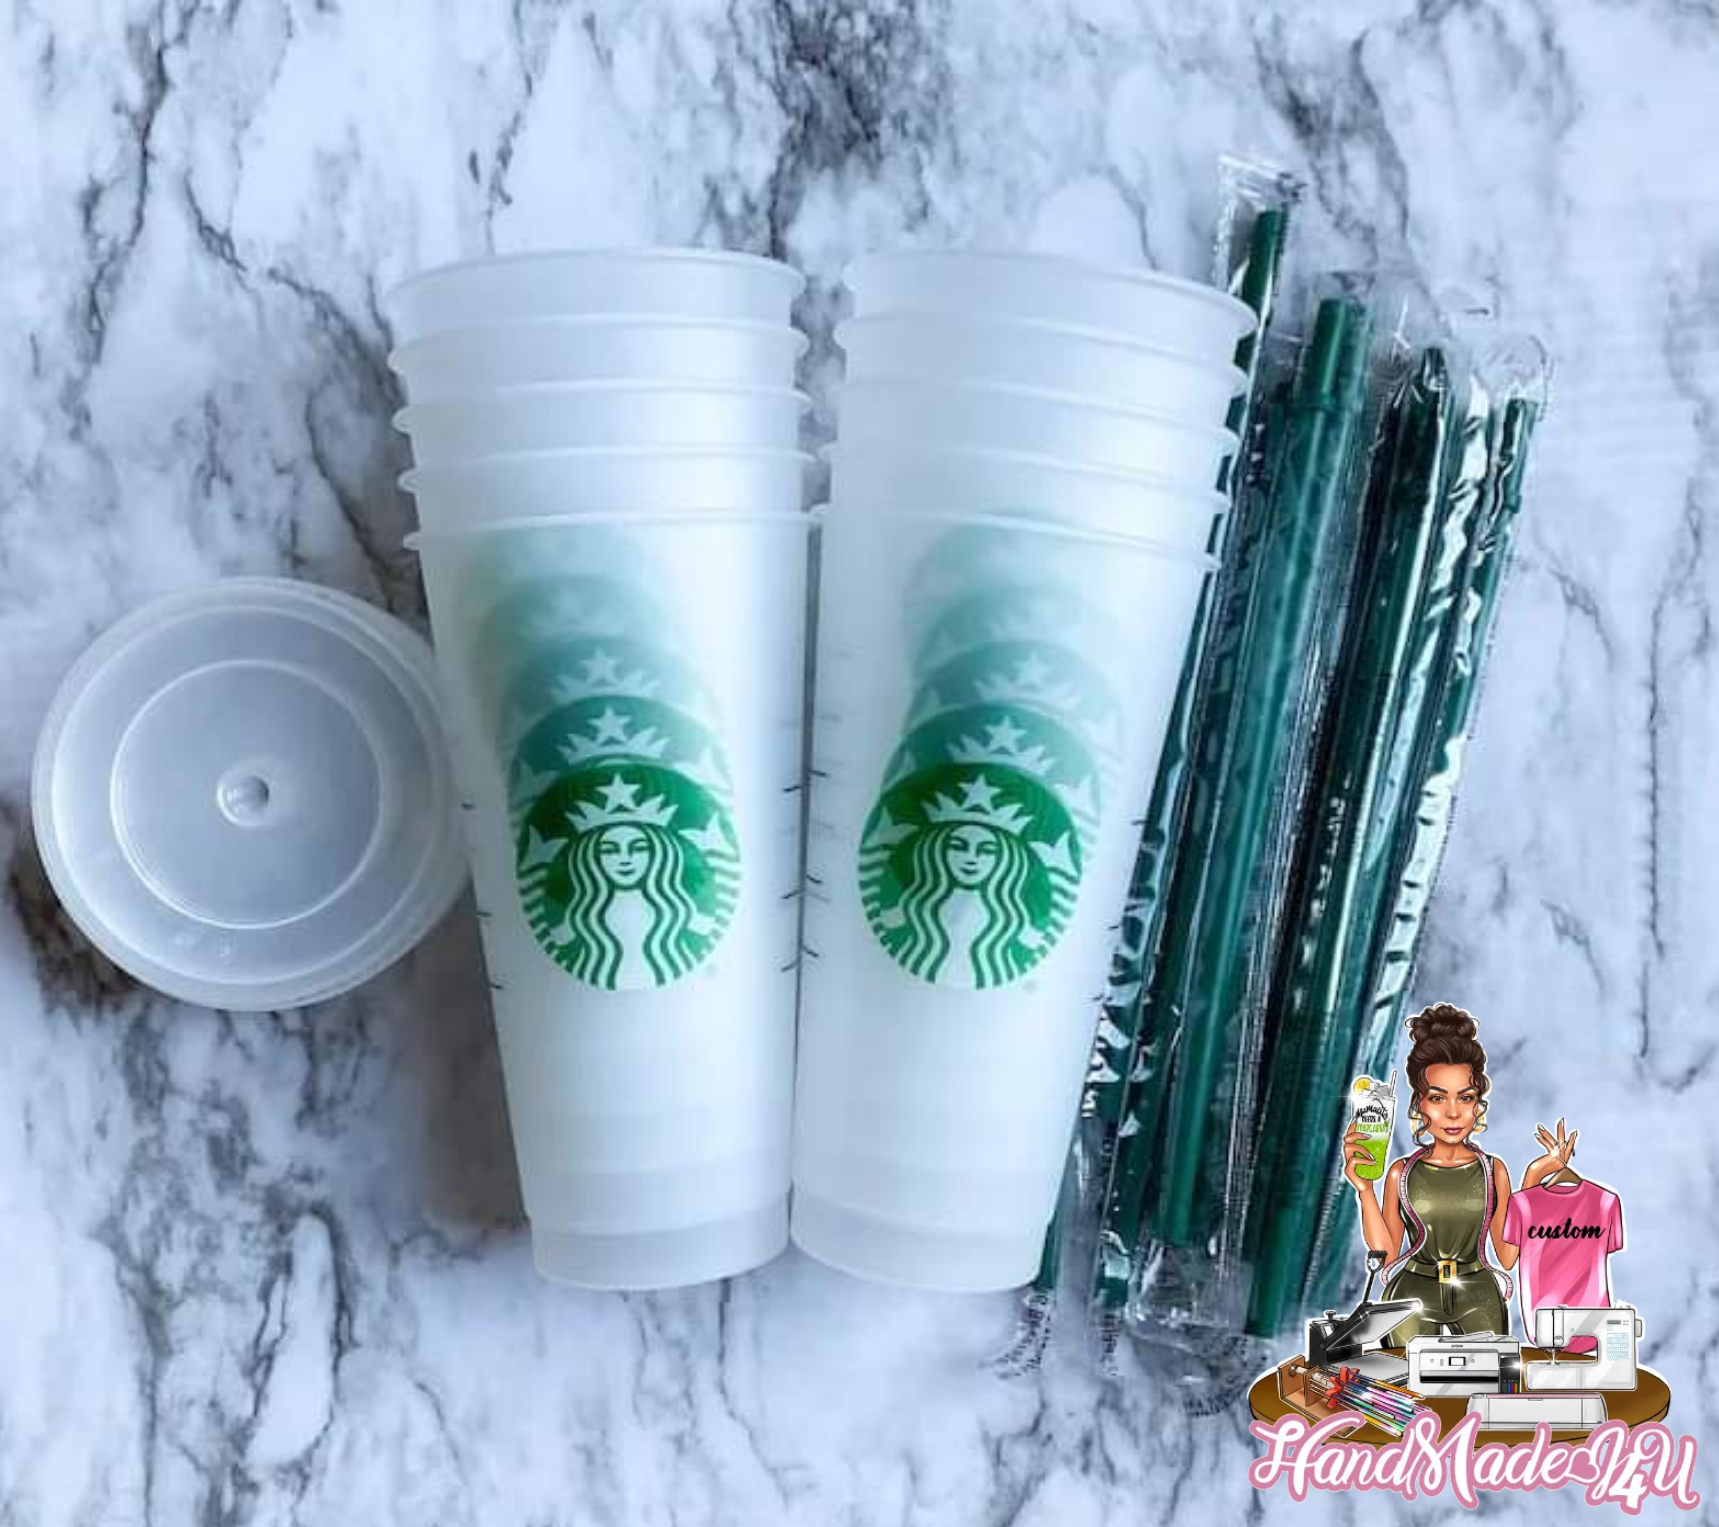 Custom Girl Starbucks Cup Personalized Tumbler Cup With Name 